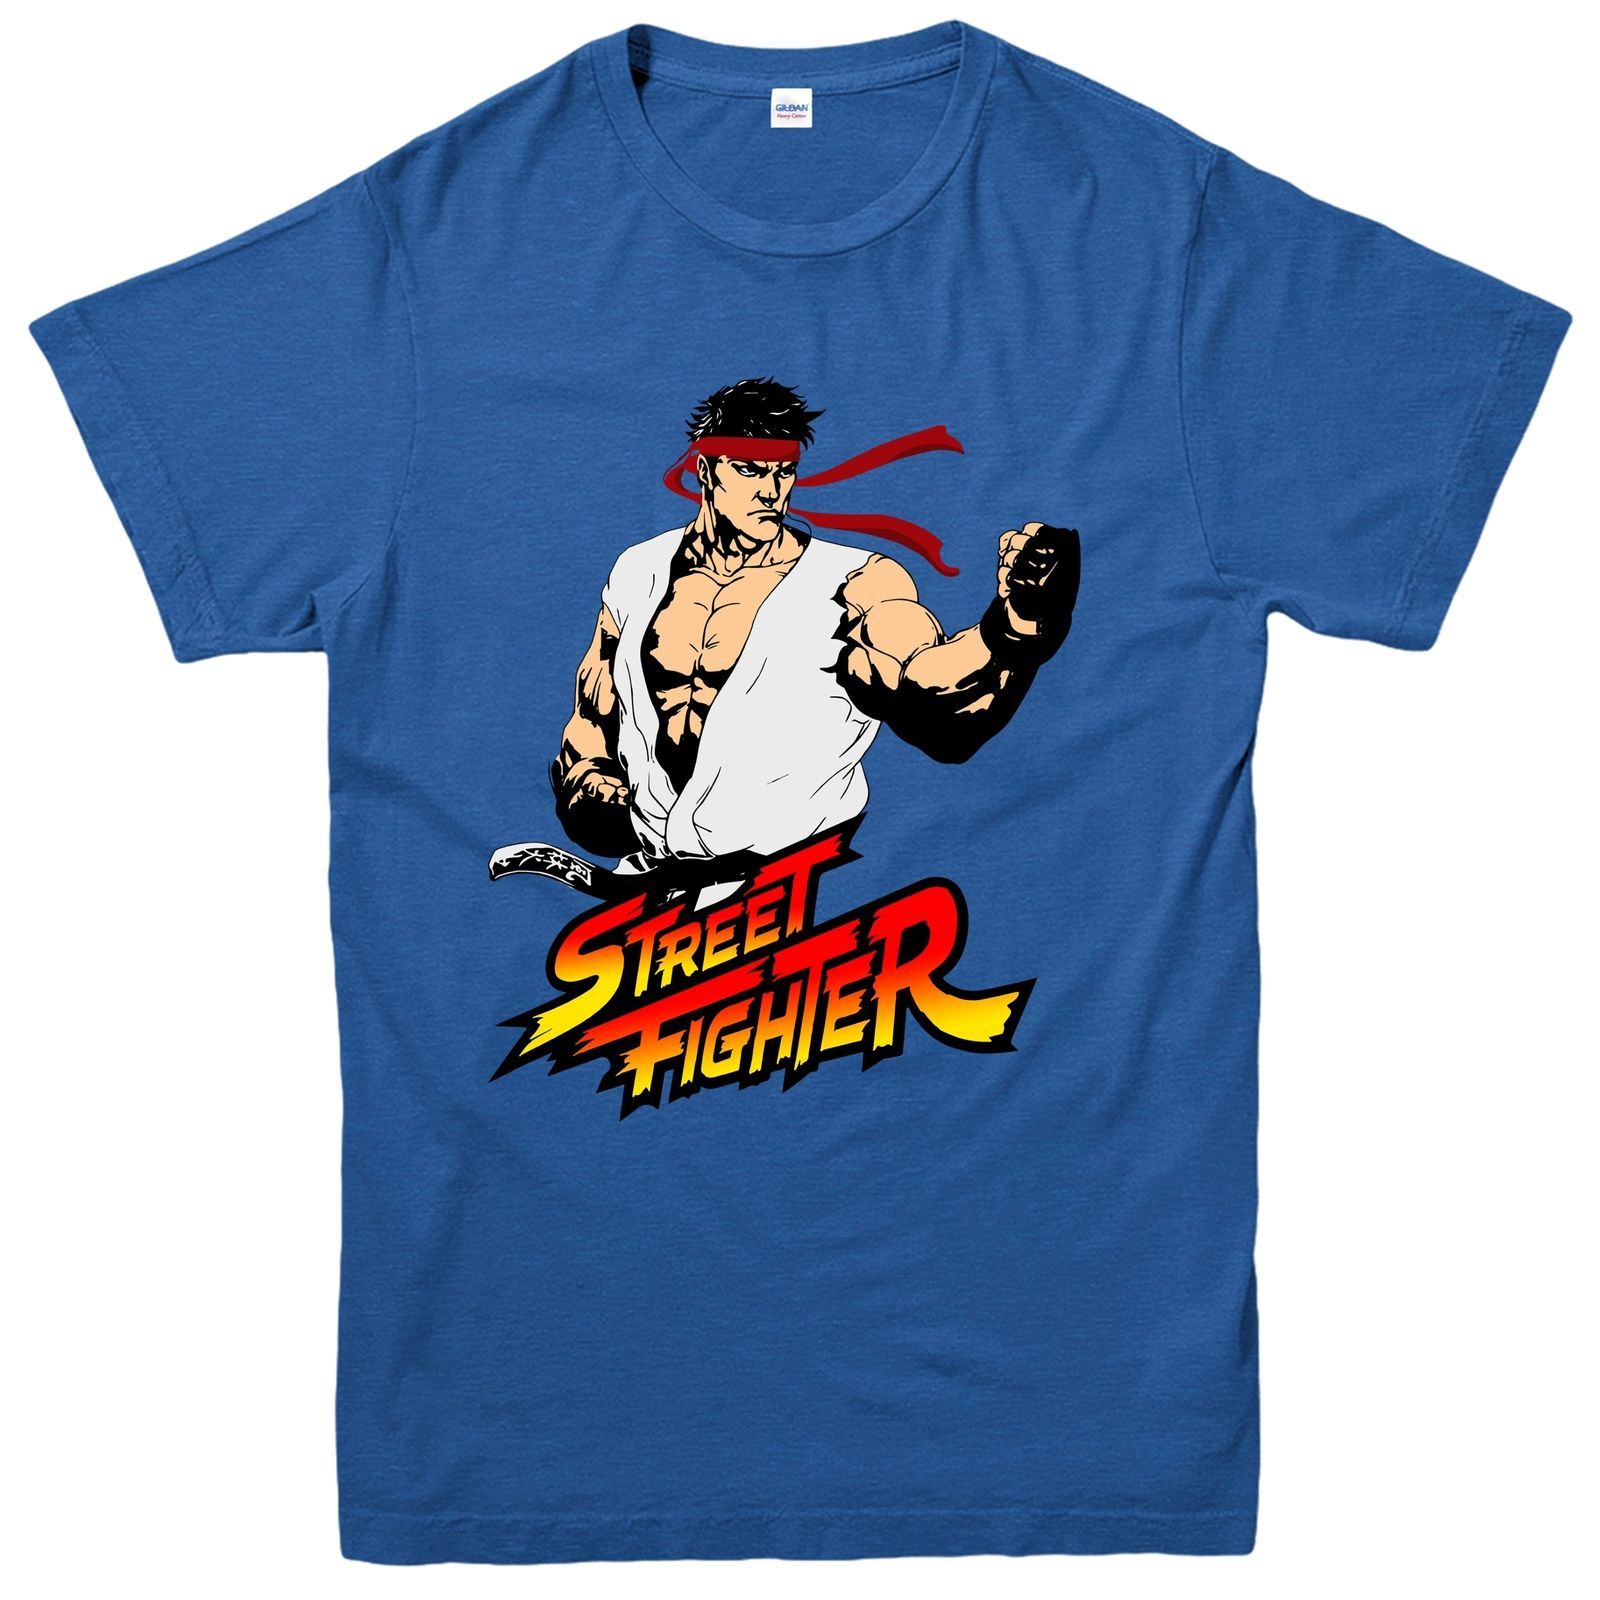 Ryu Street Fighter T Shirt, Fictional Super Fighter Video Game Tee Top ...